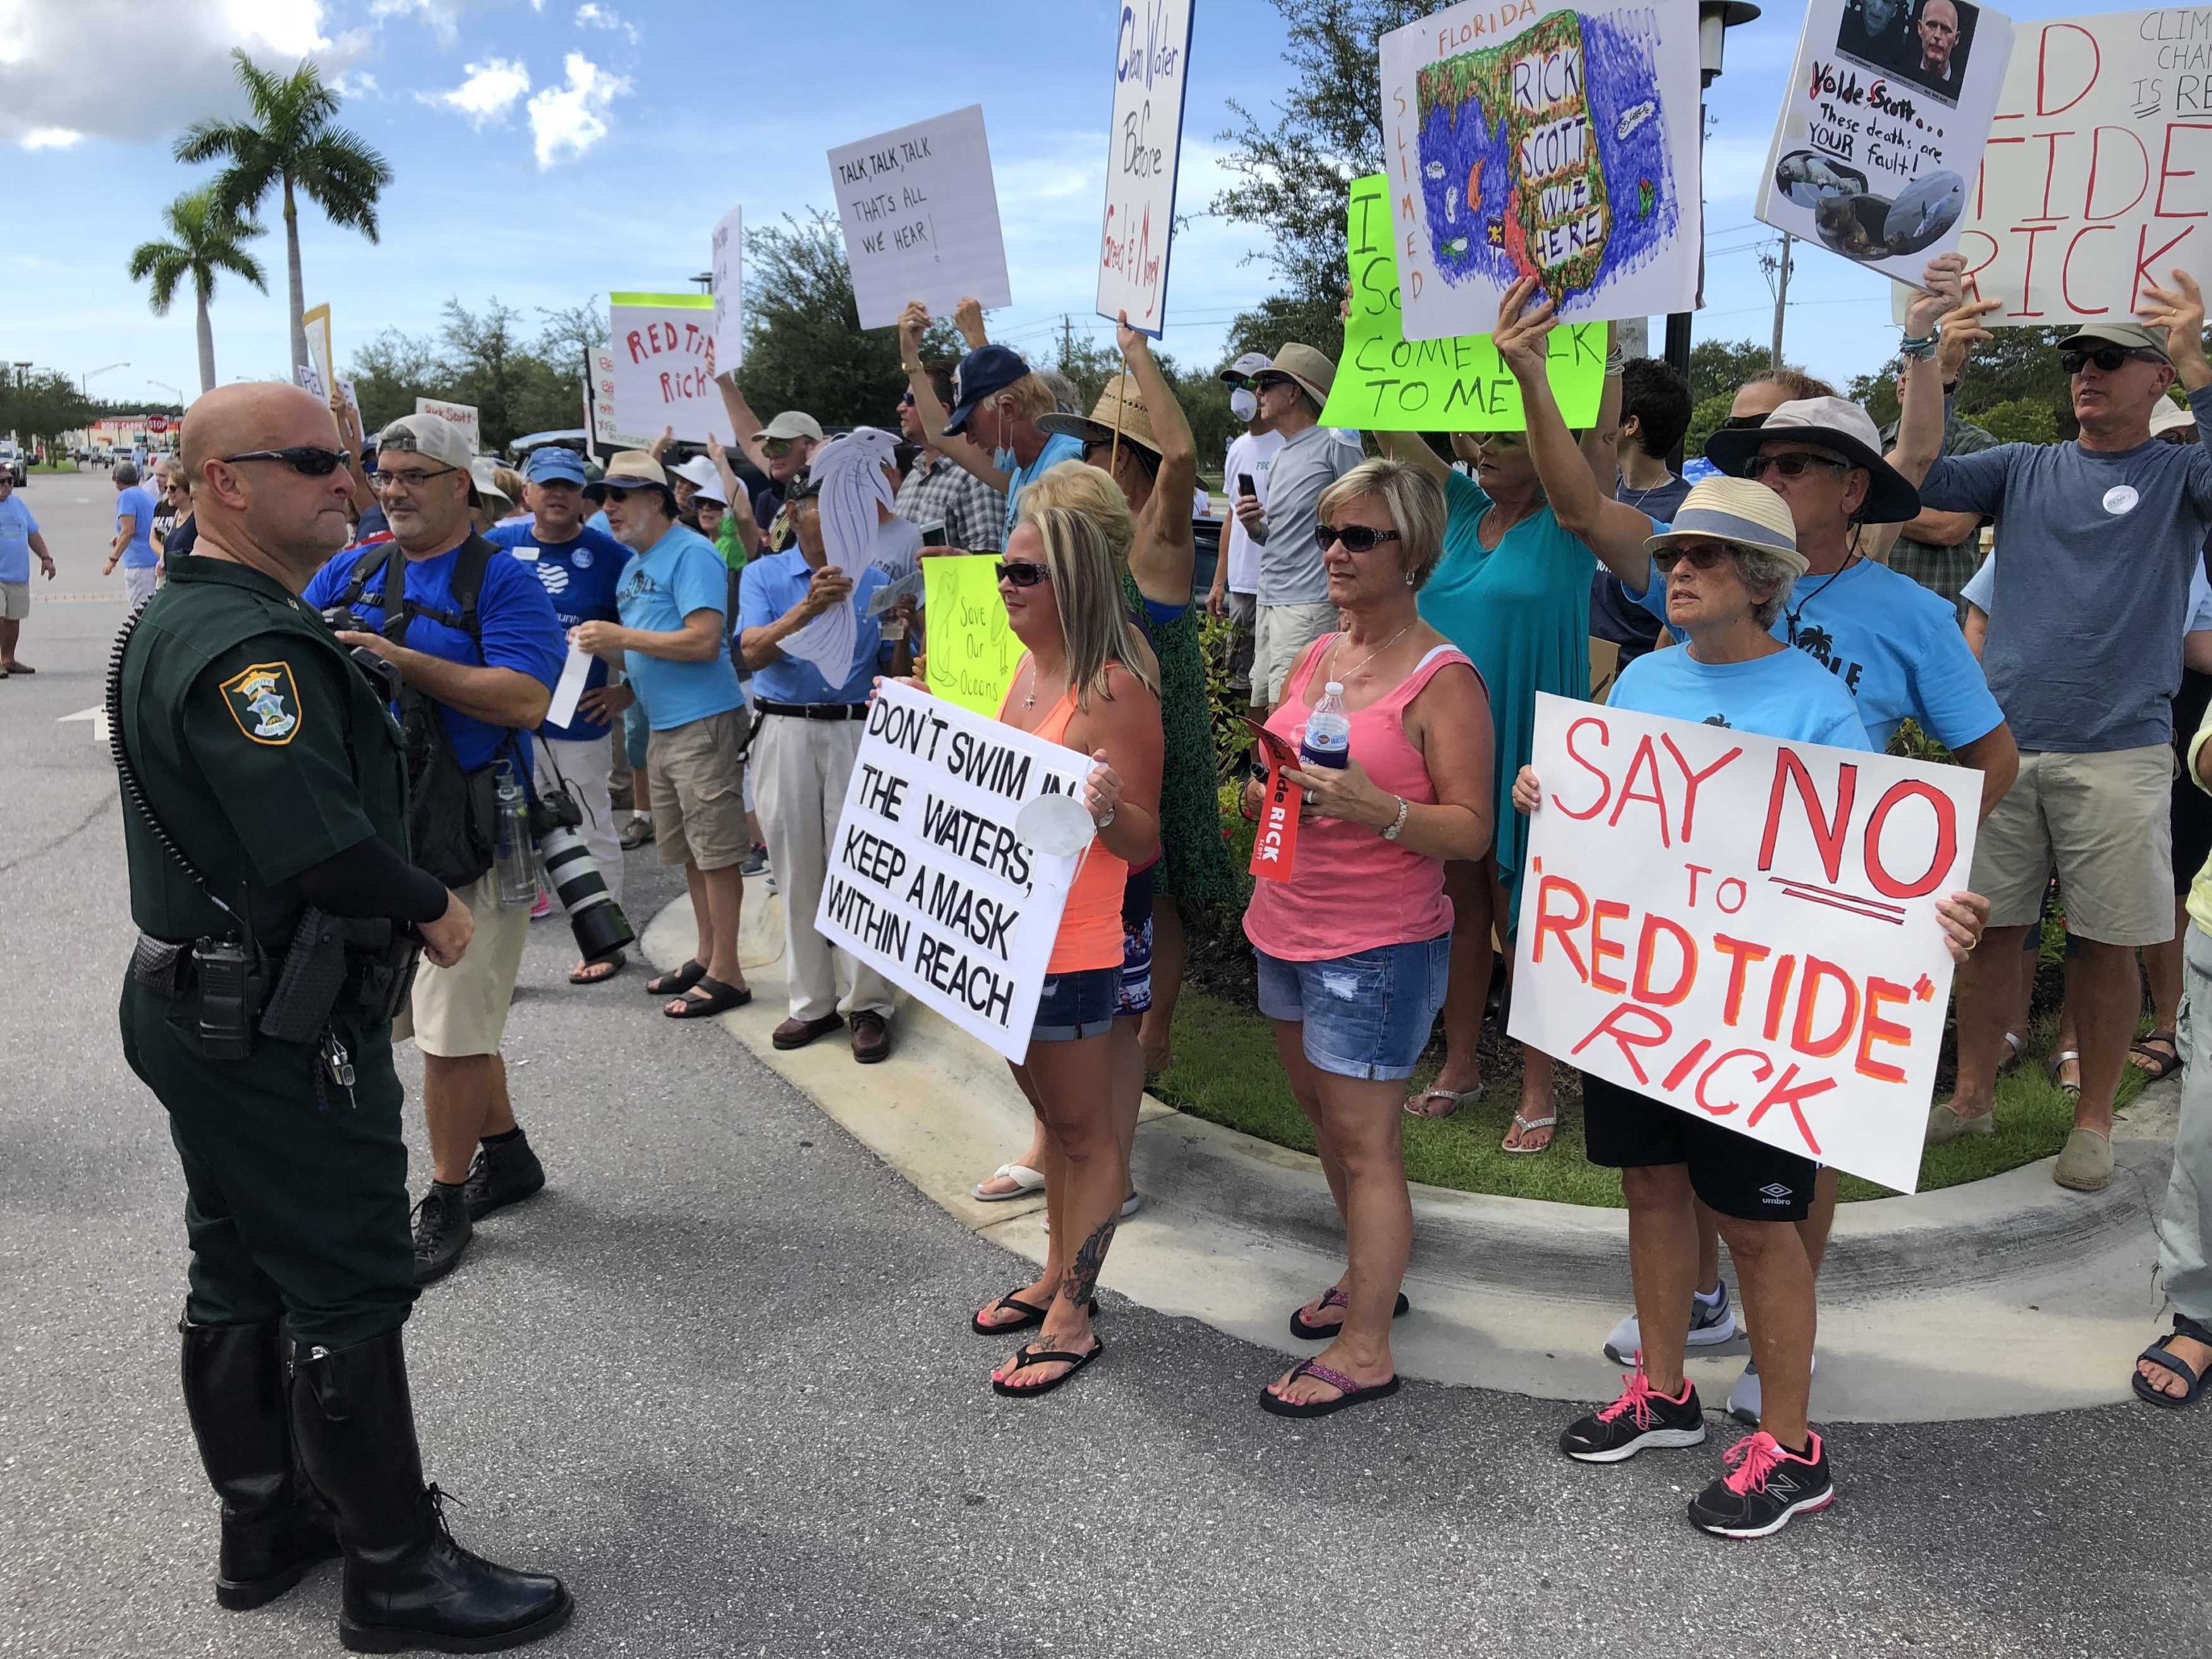 Rick Scott red tide protesters